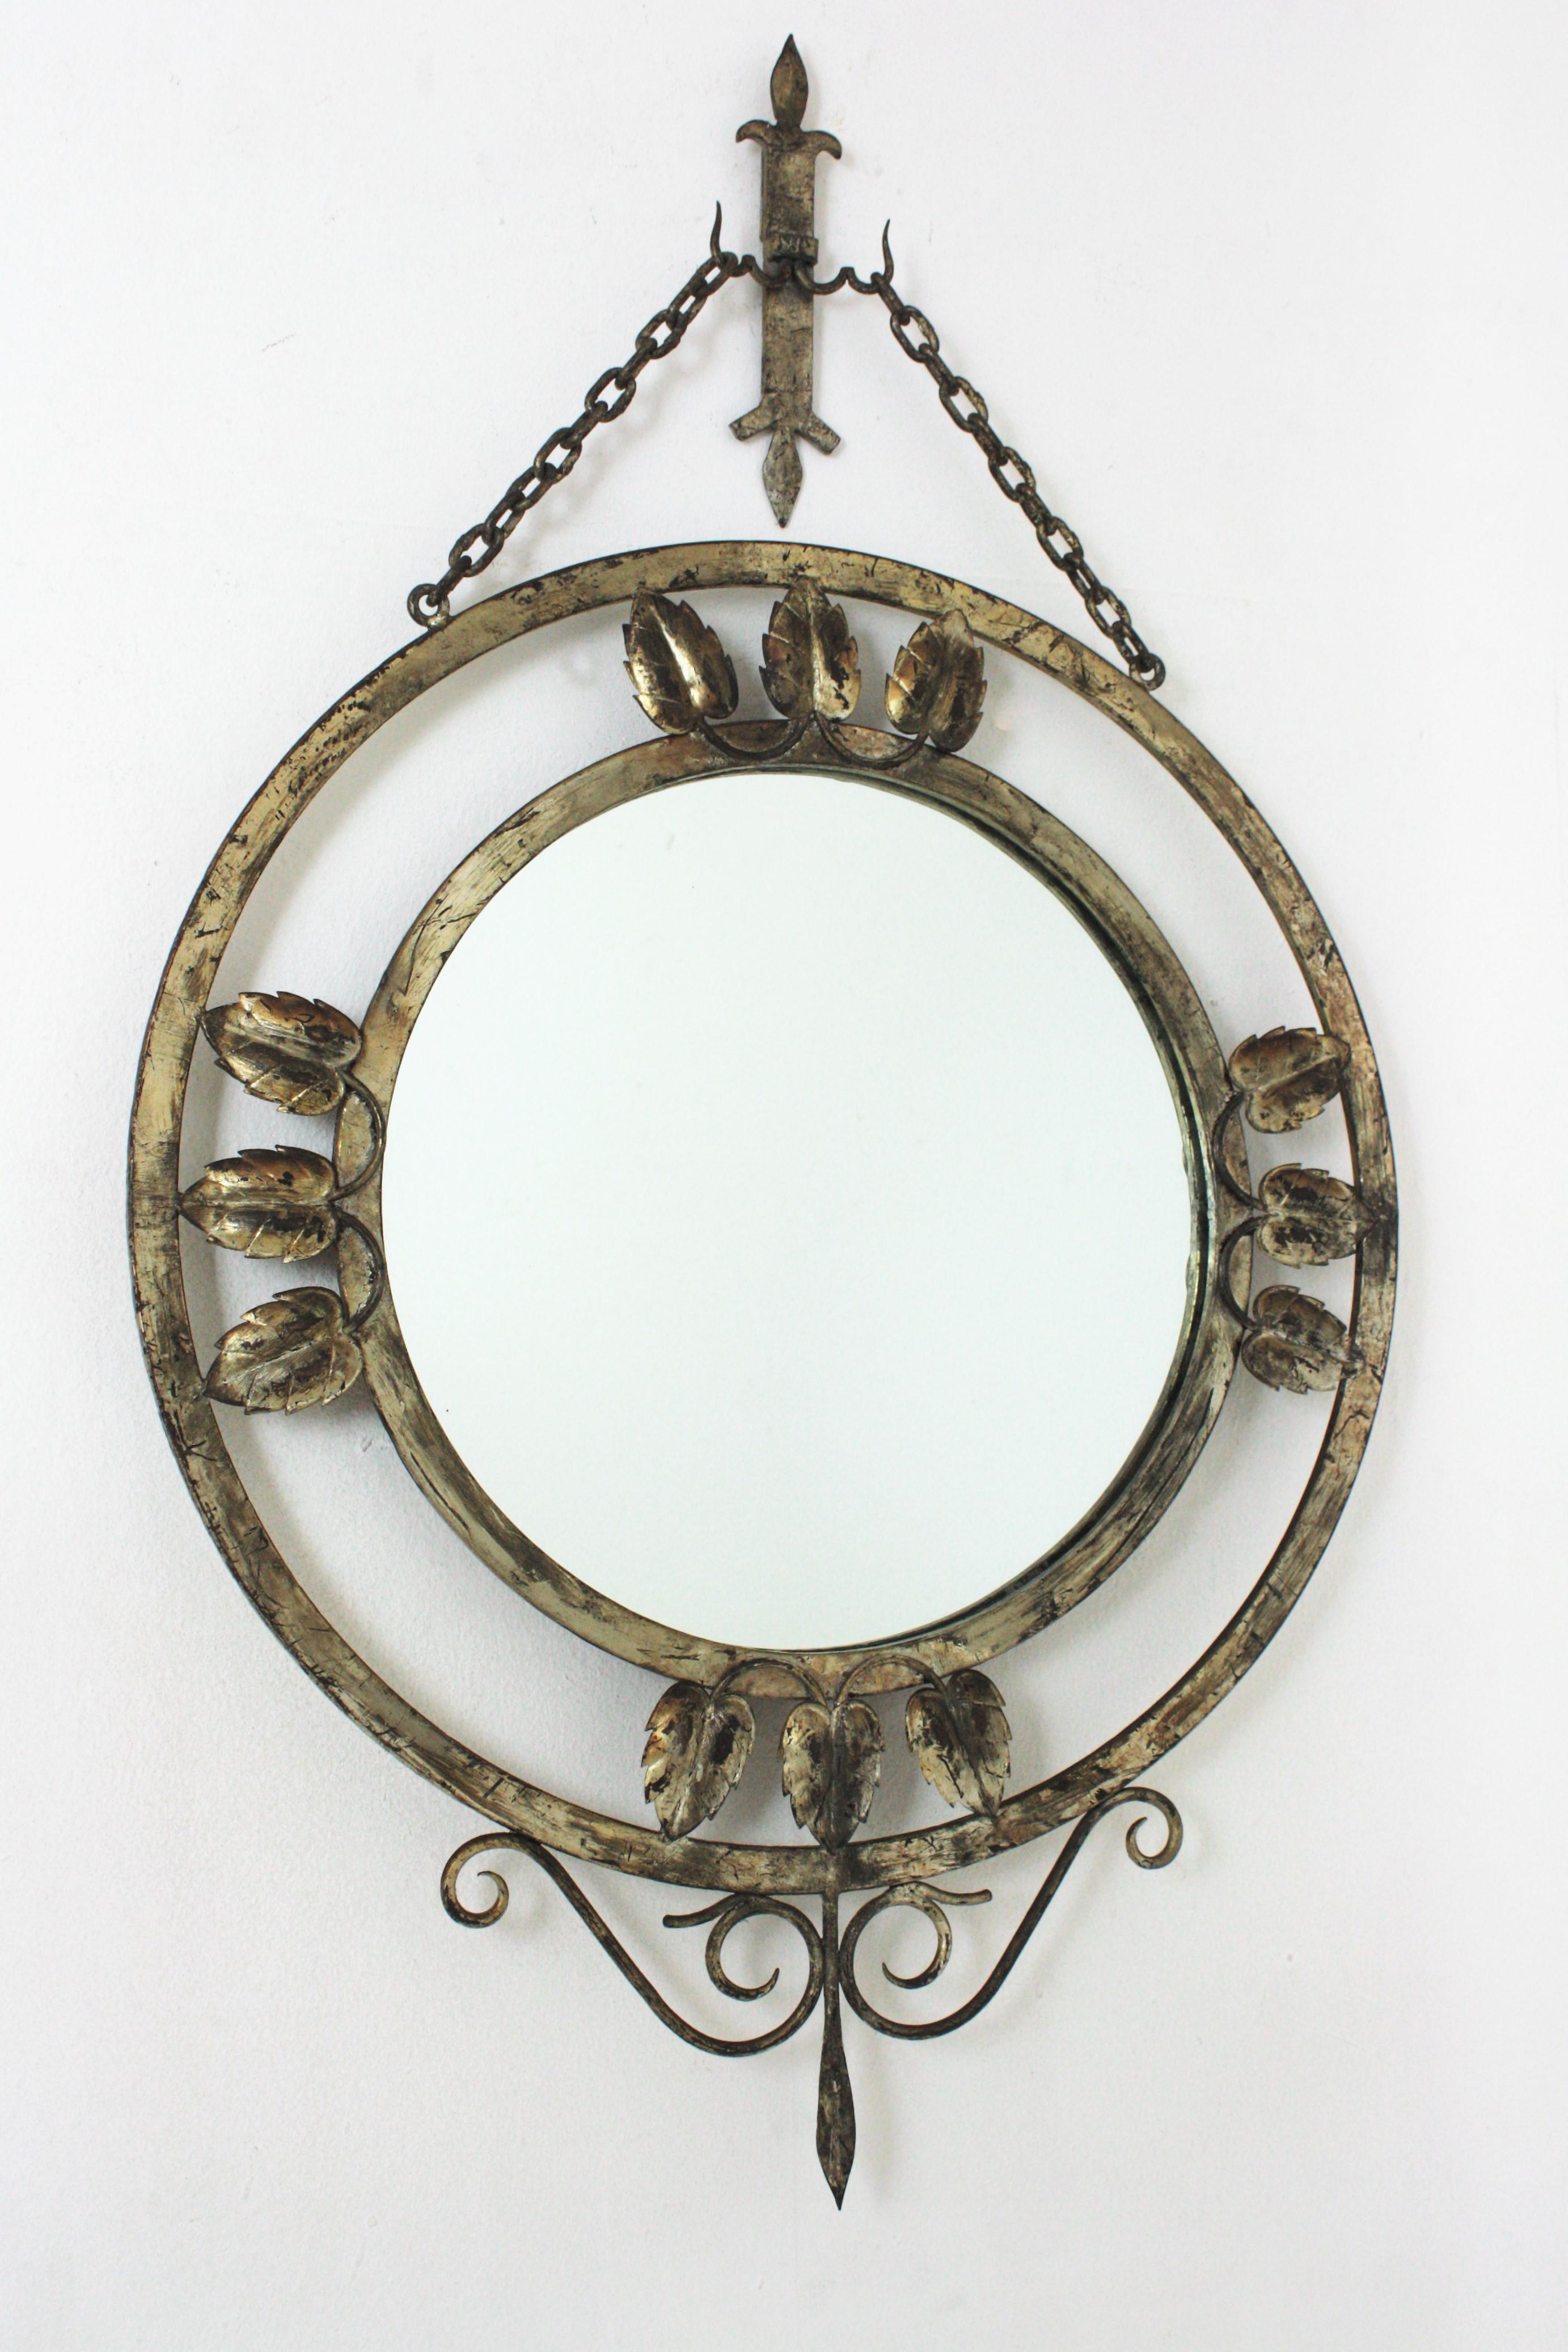 Silver Leaf gilt wrought iron round mirror with scroll and leaves details, France, 1940s.
Beautiful round hanging walll mirror. Elegant foliage design, hanging from two chains with decorative detail on top. It has a terrific aged patina showing the